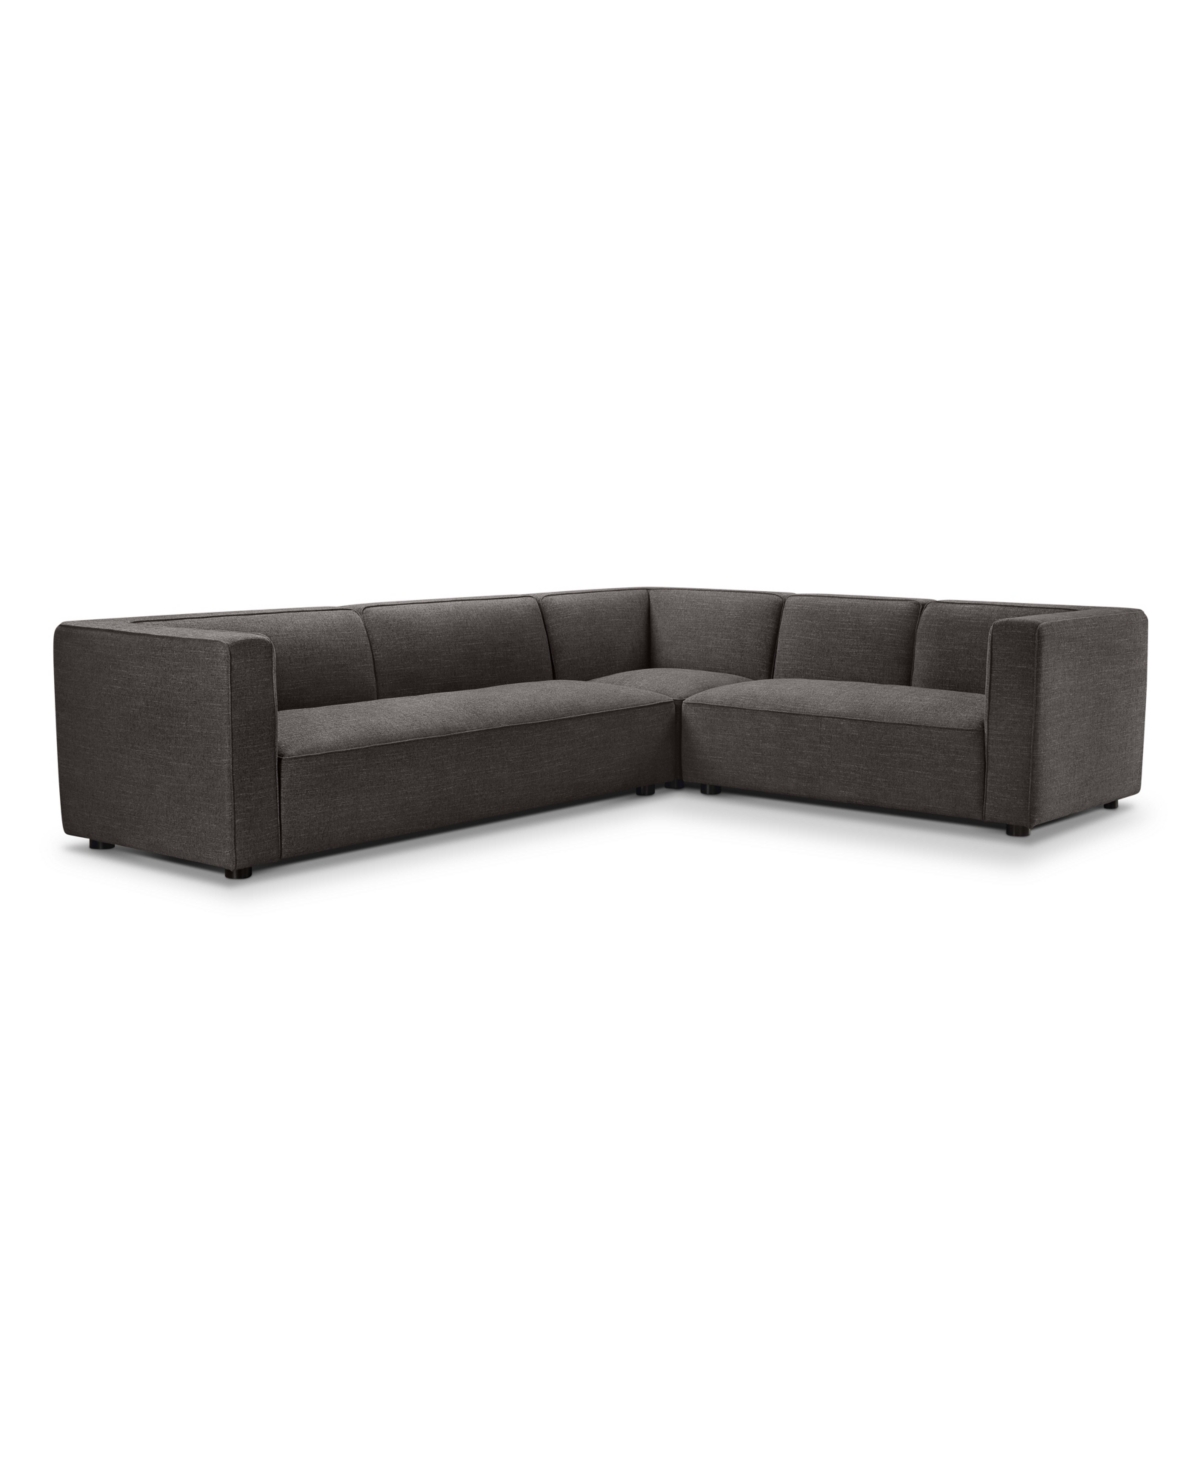 Abbyson Living Kyle 3 Piece Stain-resistant Fabric Sectional In Gray